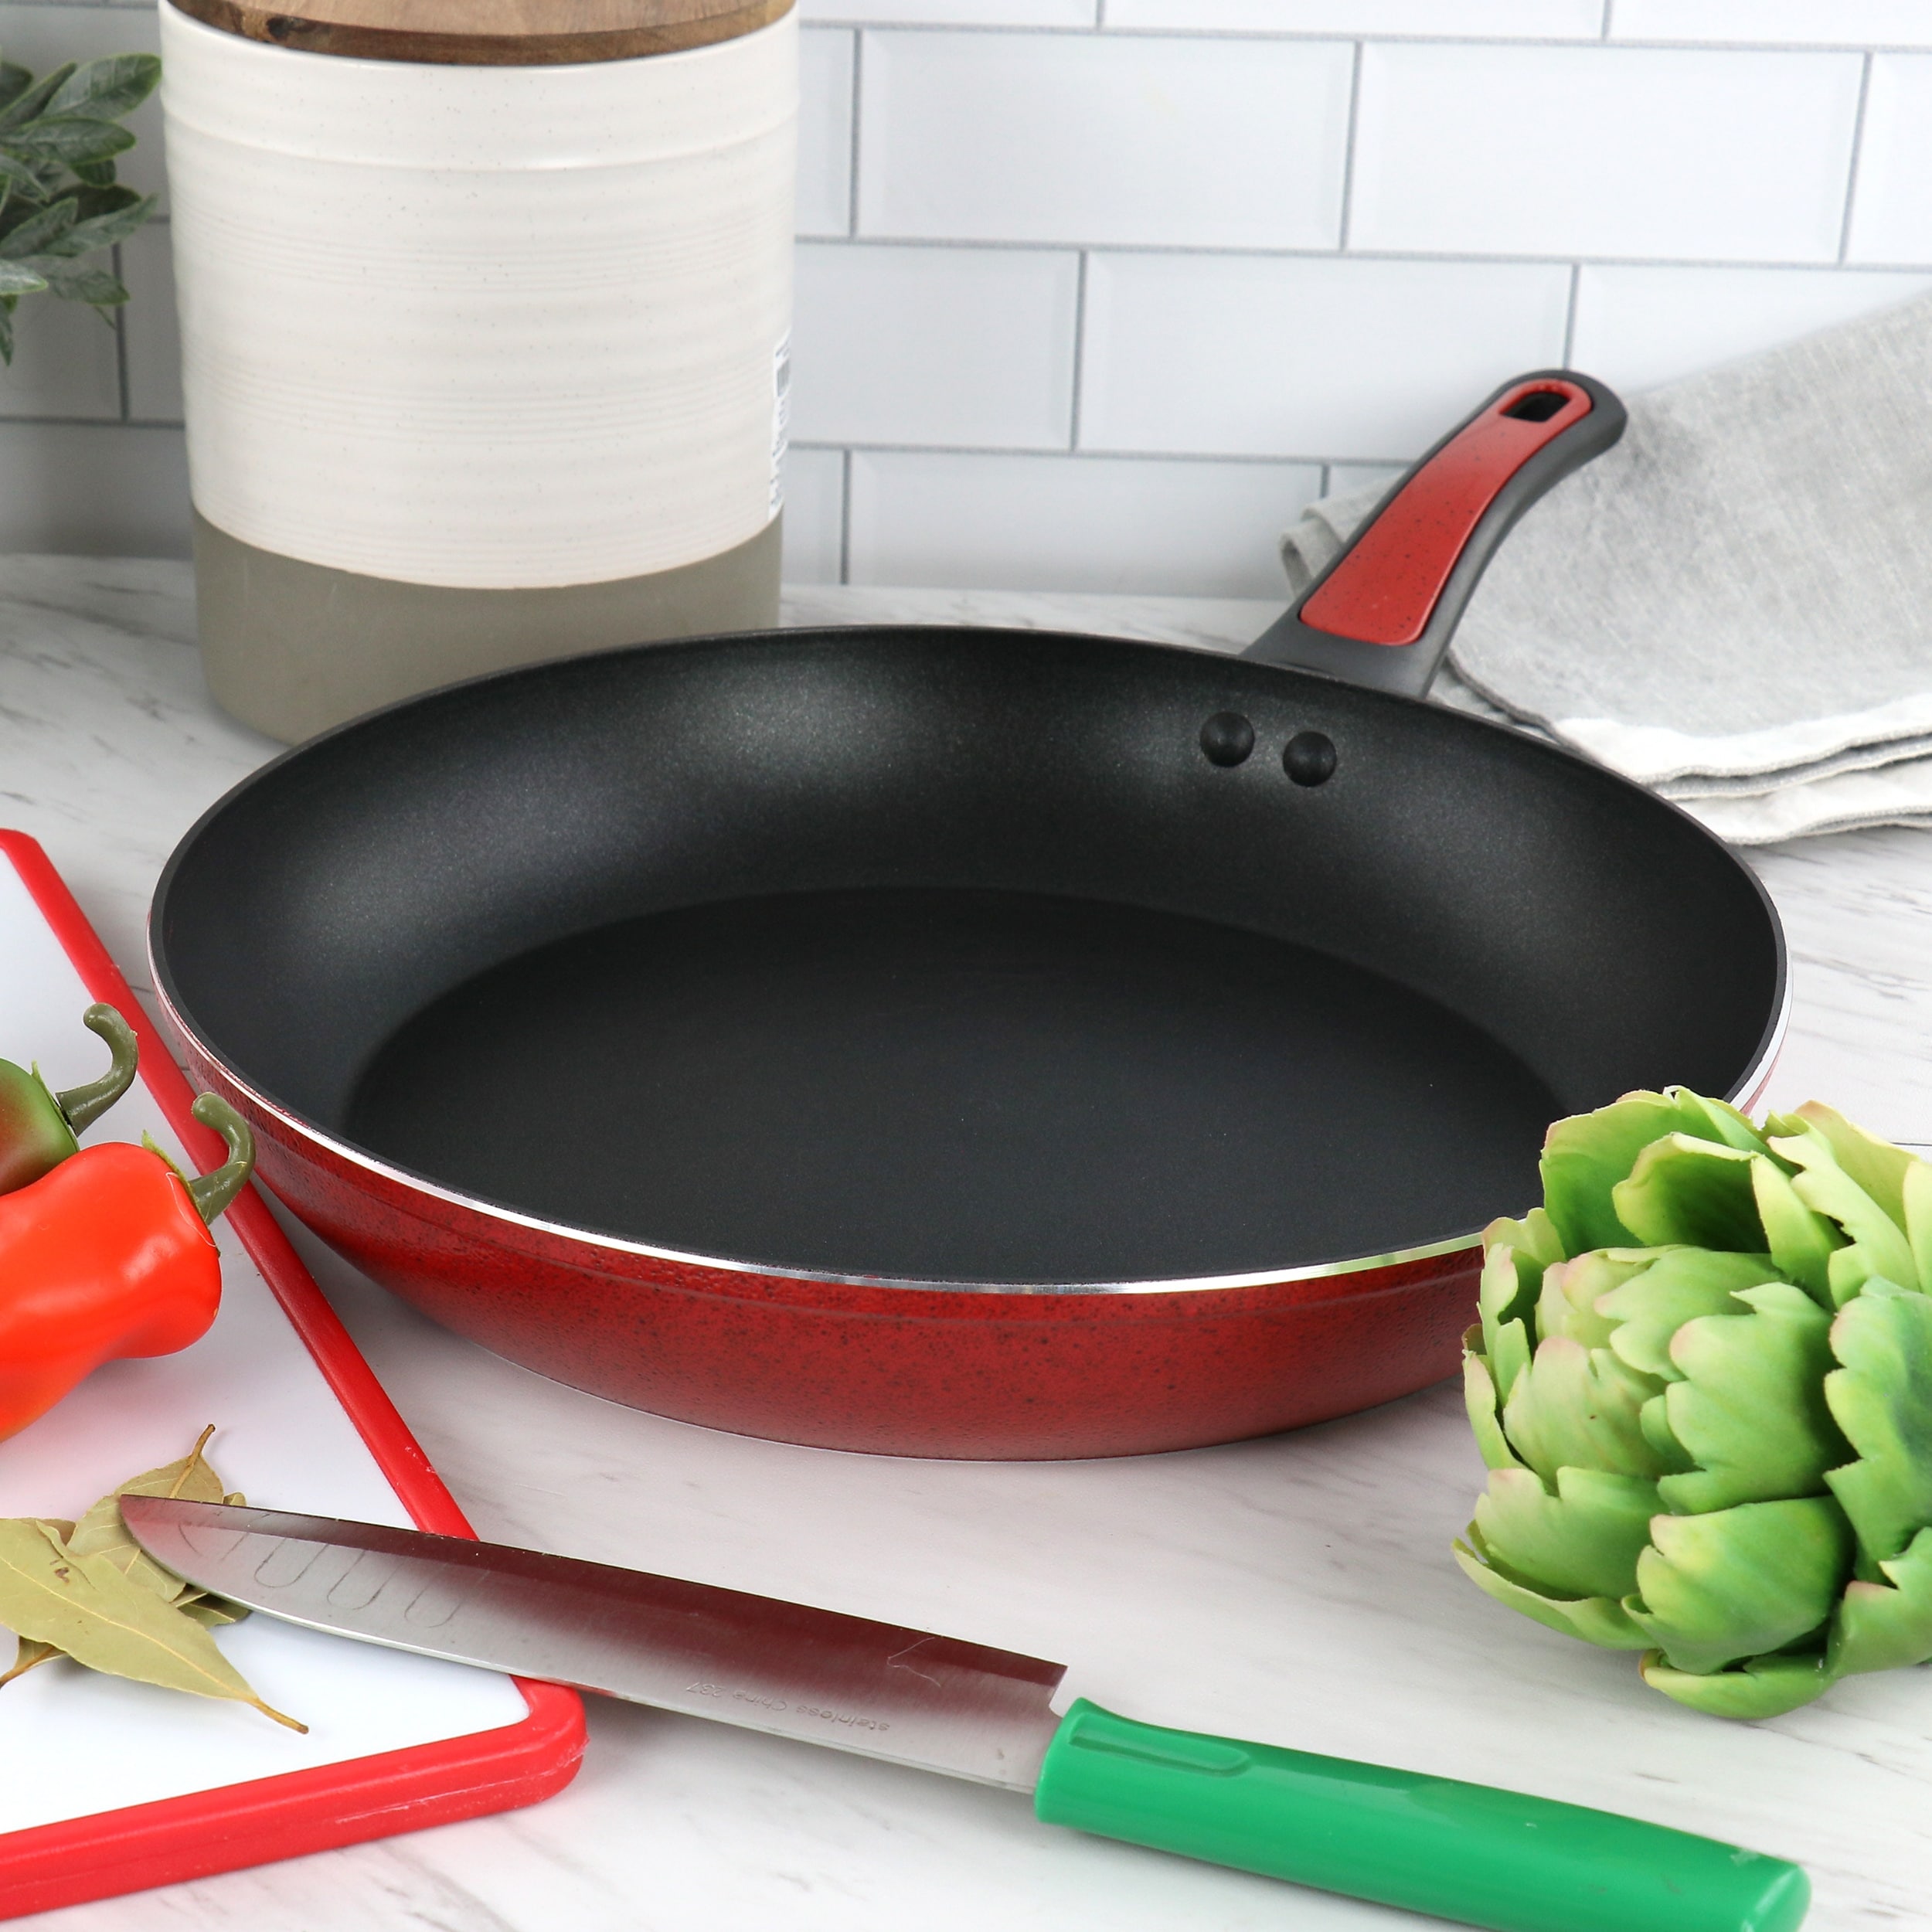 https://ak1.ostkcdn.com/images/products/is/images/direct/49cfafd0da2aaf2fee98433b9503100913893e29/Oster-Claybon-12-Inch-Nonstick-Frying-Pan-in-Speckled-Red.jpg